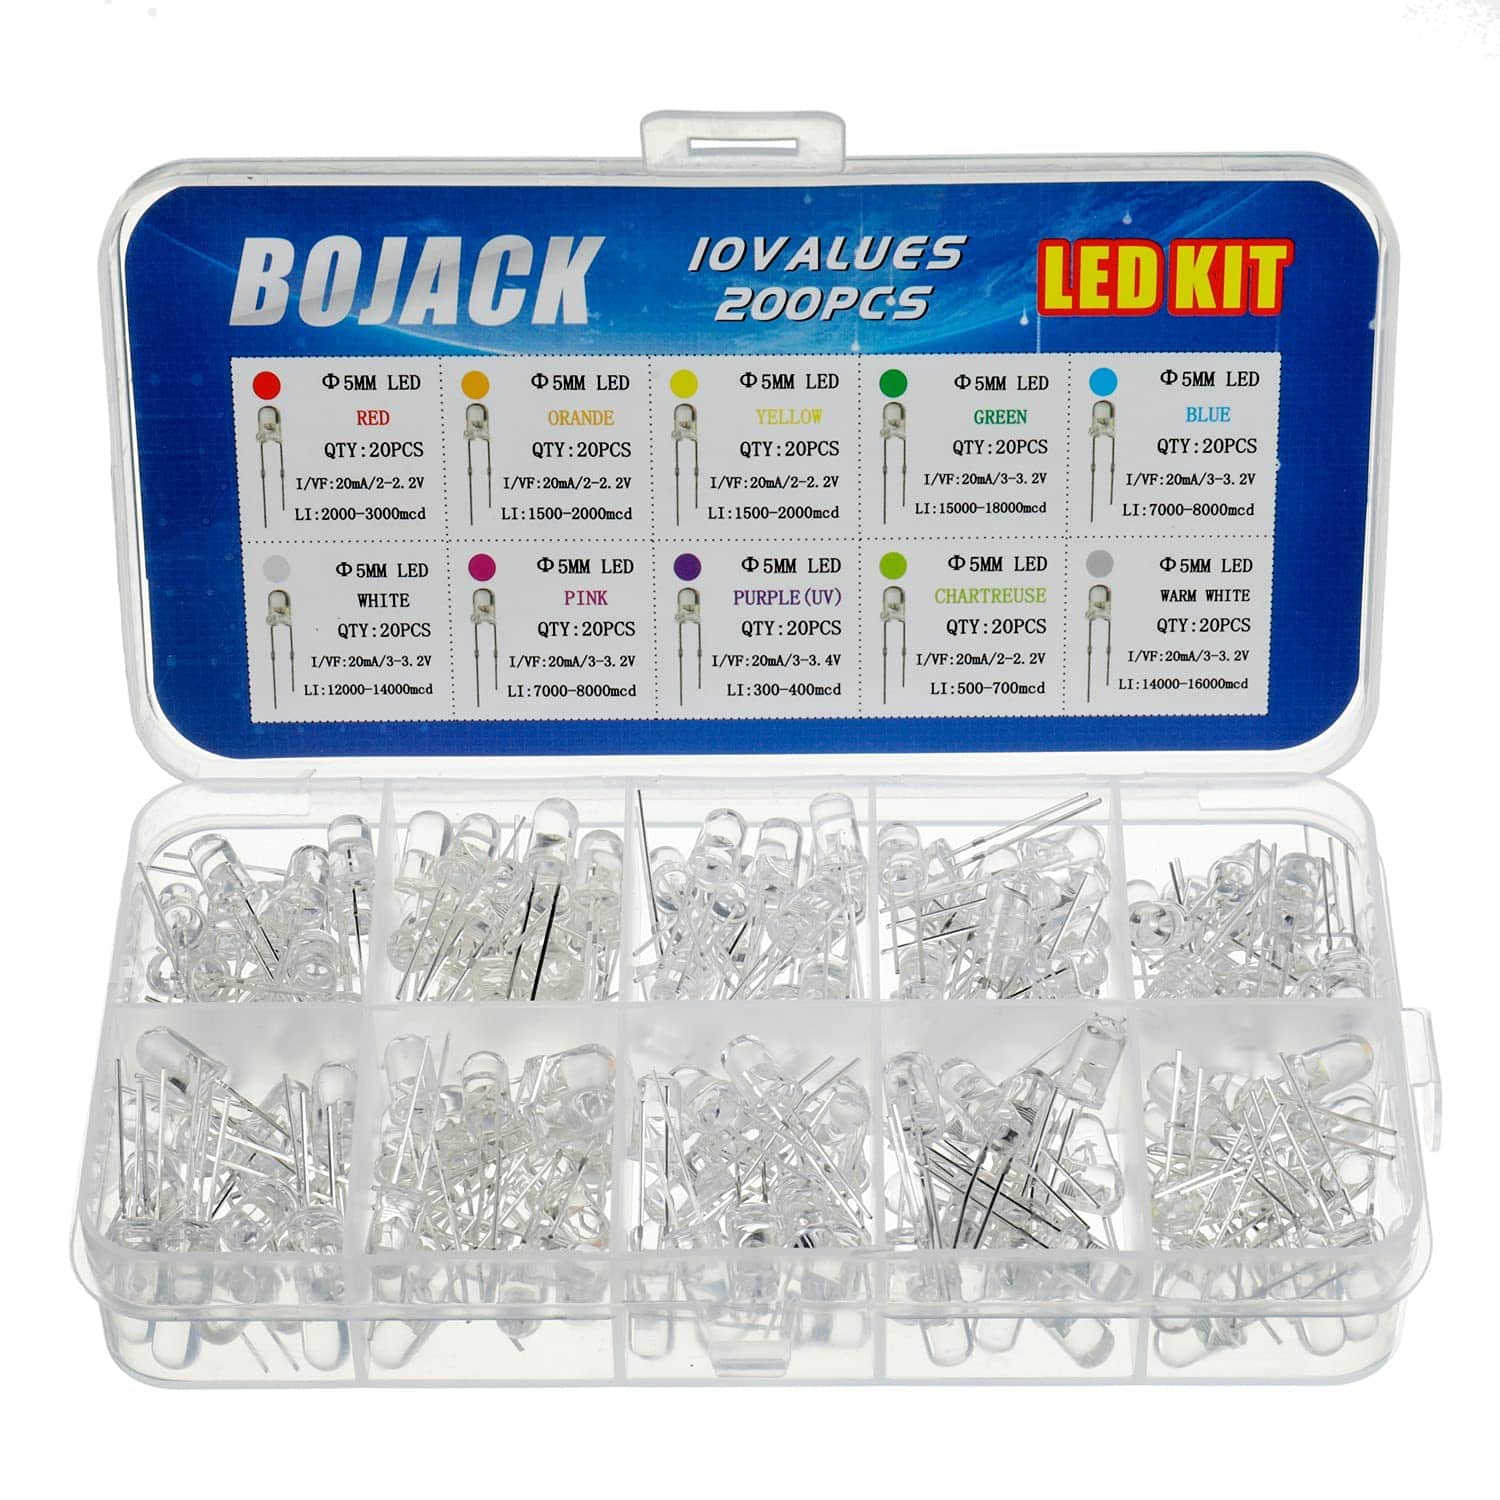 BOJACK 5 Colors 500 pcs 5mm LED Diode Lights Assored Kit Pack Bright Lighting Bulb Lamps Electronics Components 5 mm Light Emitting Diodes Parts